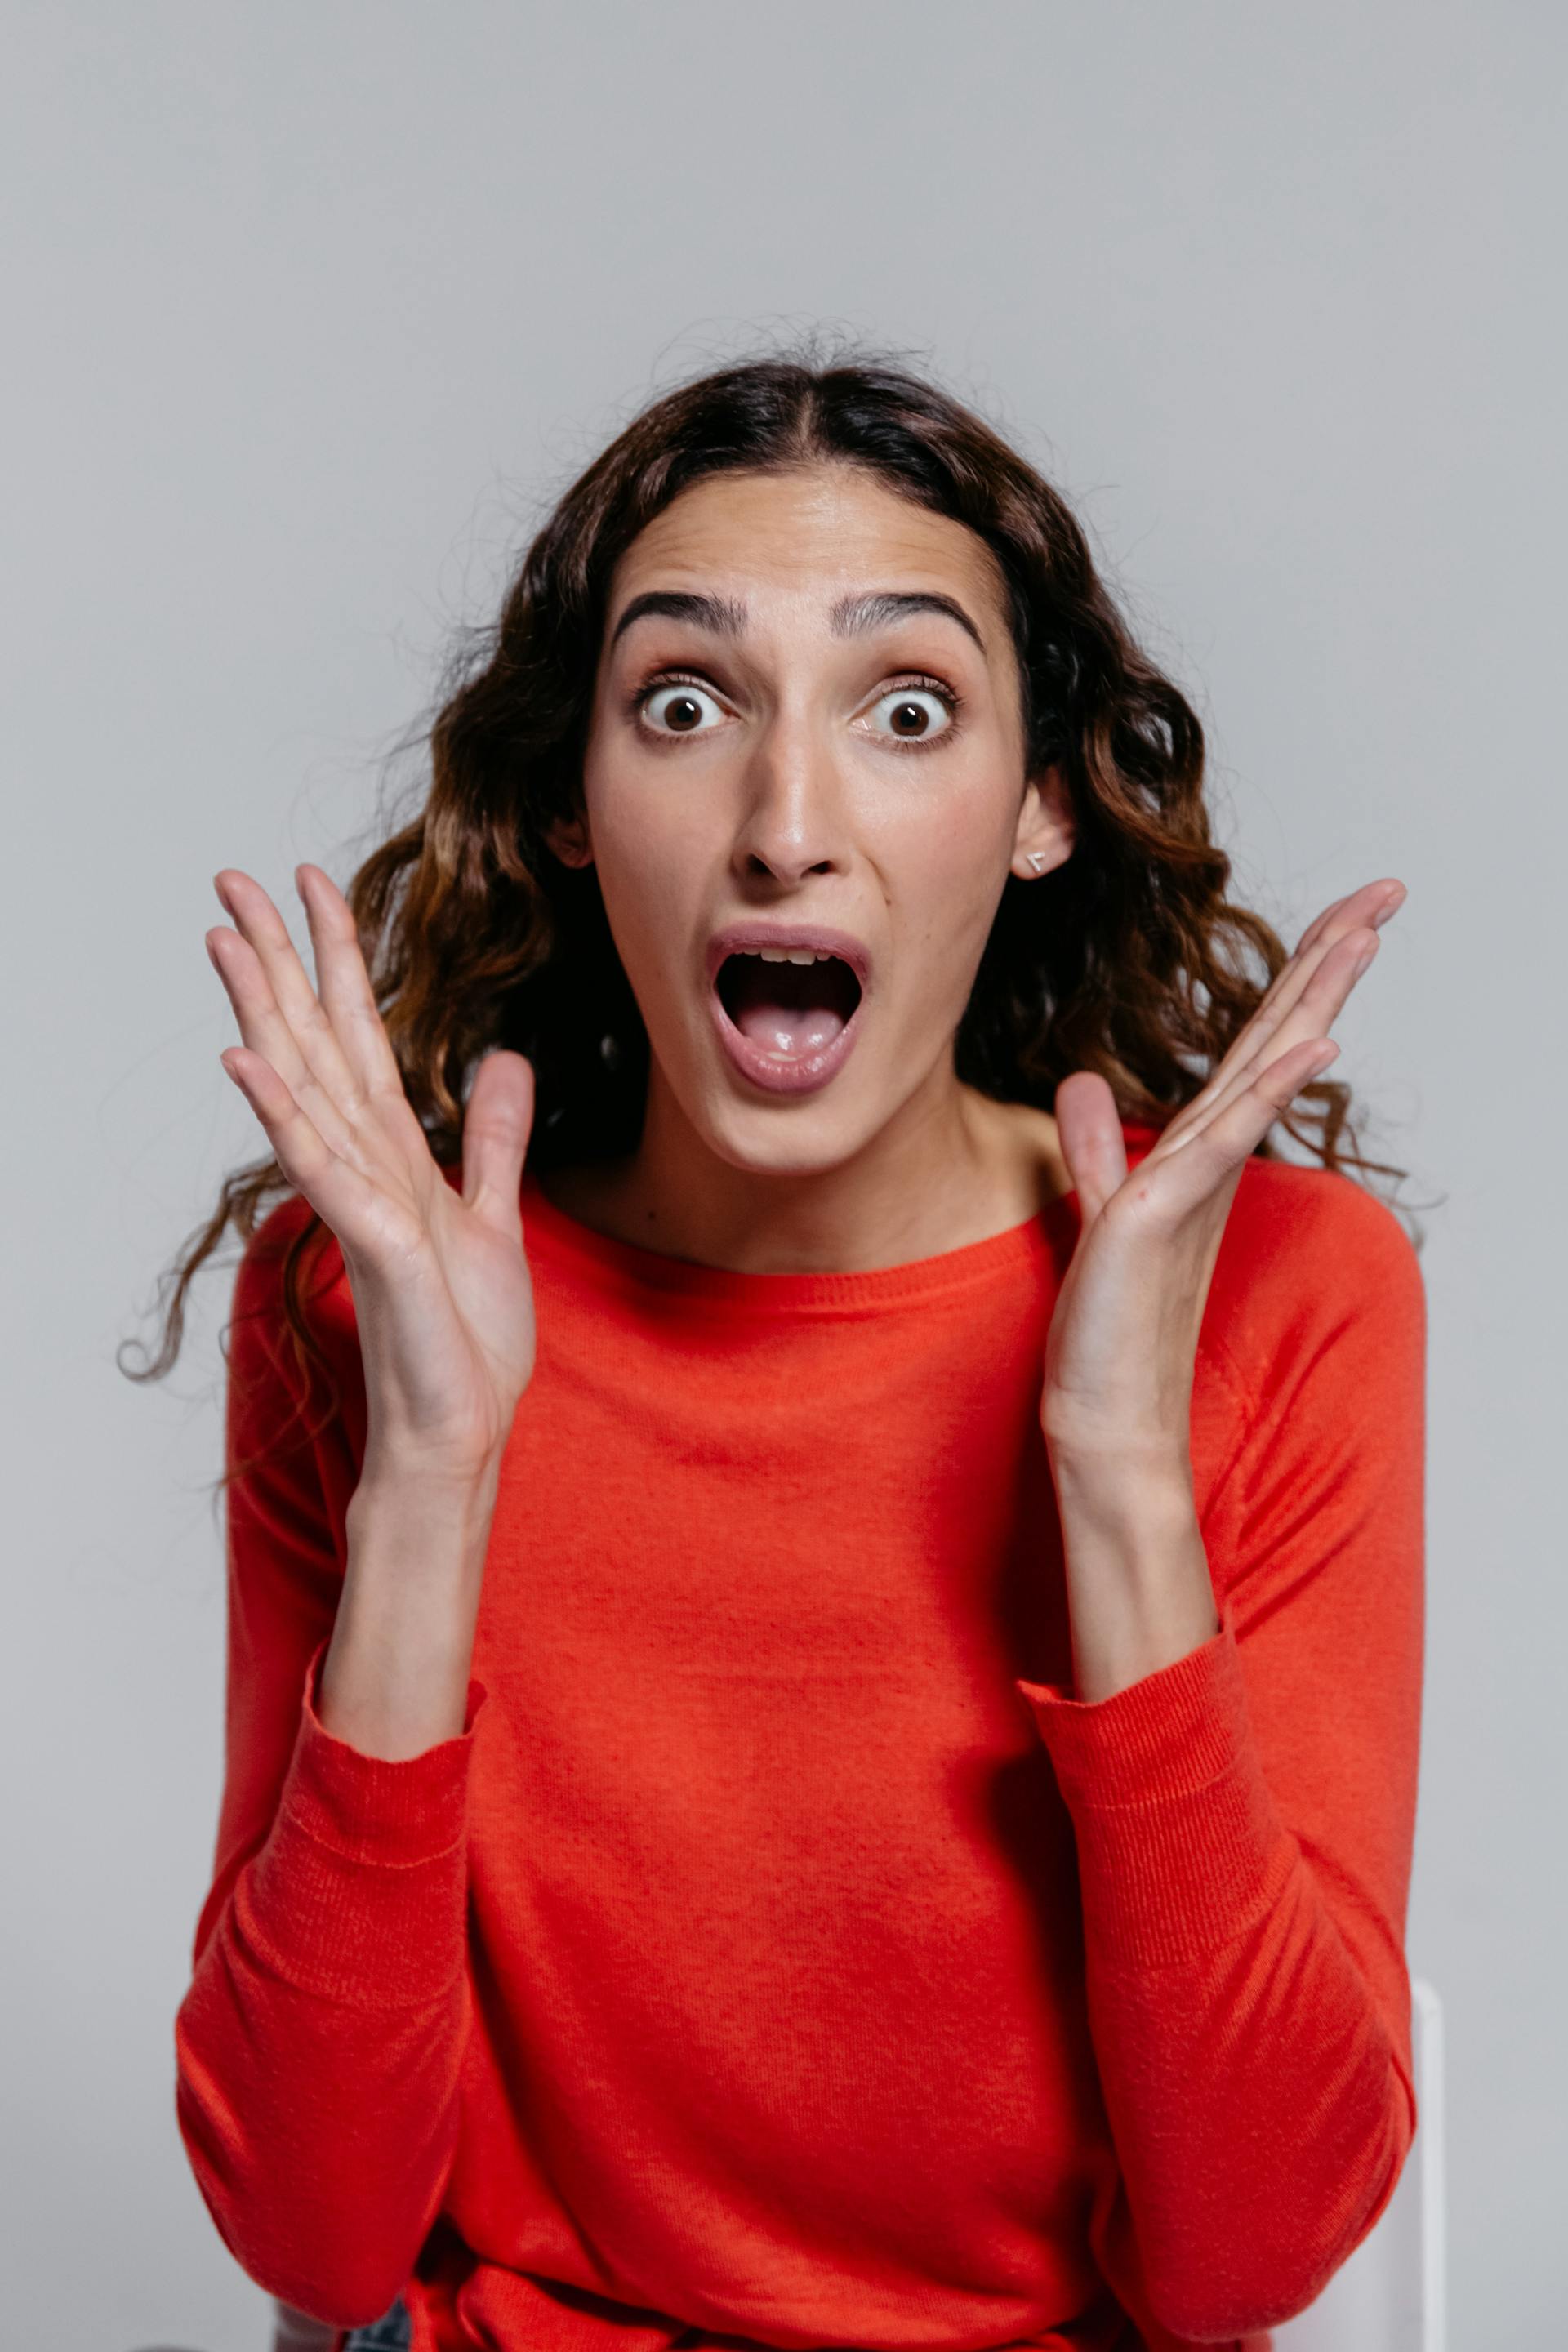 A shocked woman with her hands up | Source: Pexels